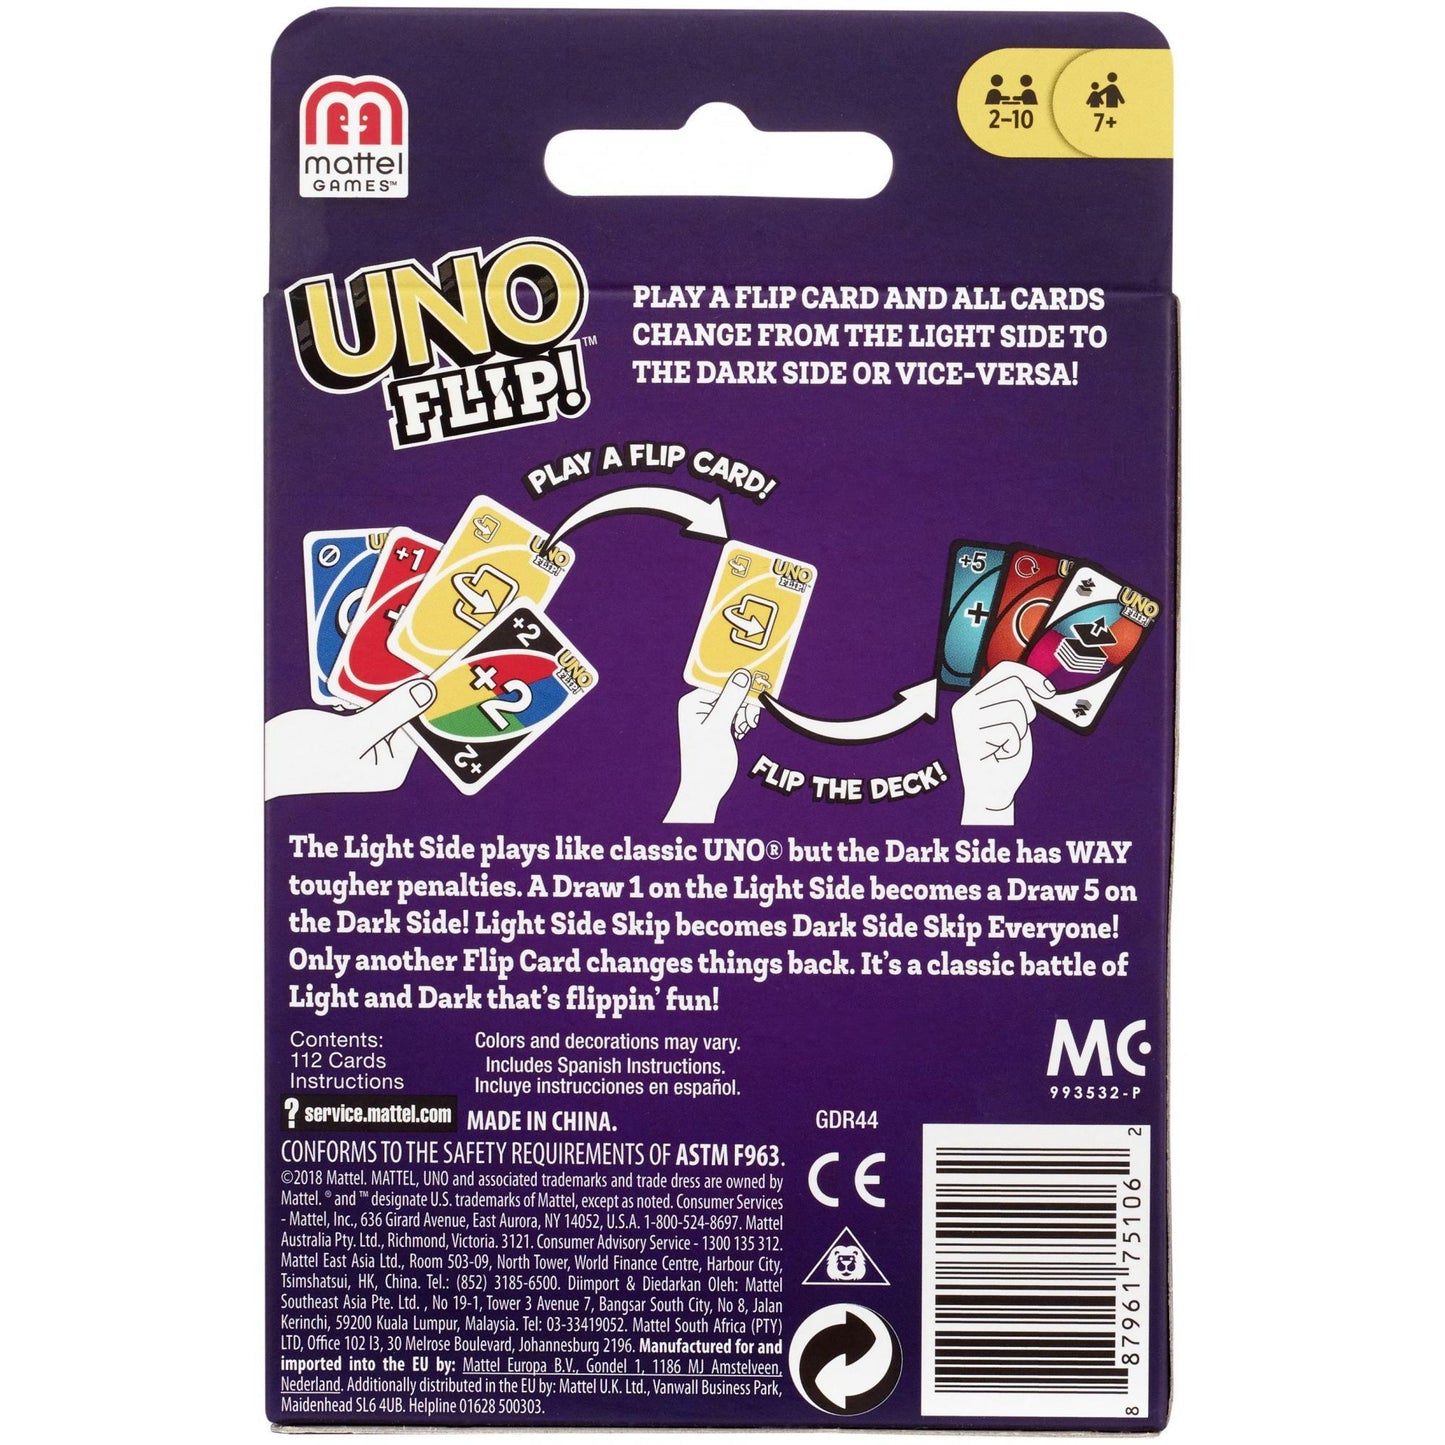 UNO FLIP! Double Sided Card Game for 2-10 Players Ages 7Y+